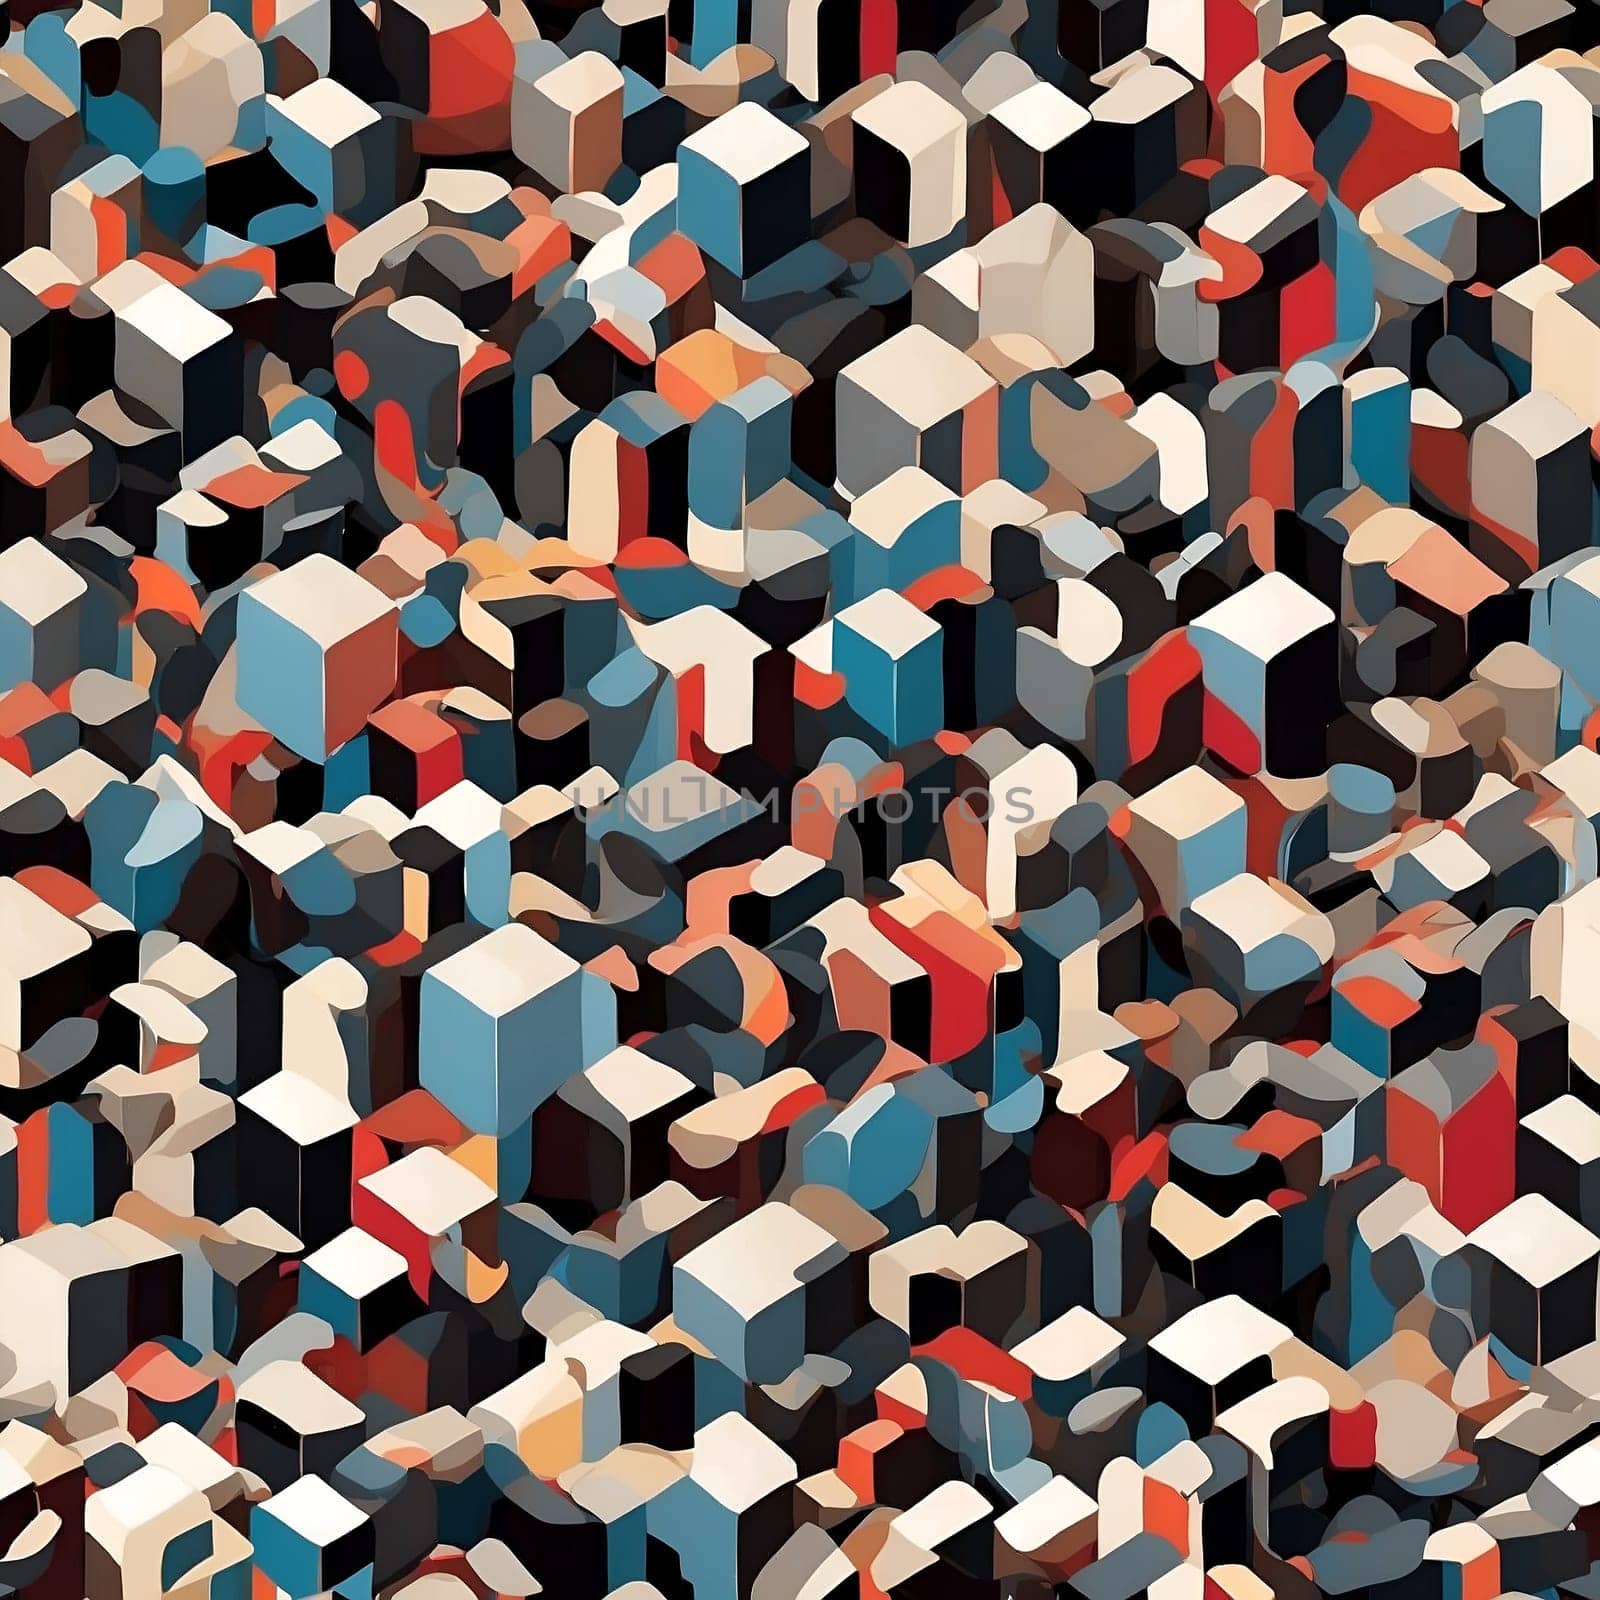 A seamless pattern formed by a diverse assortment of blocks in various colors, meticulously arranged.